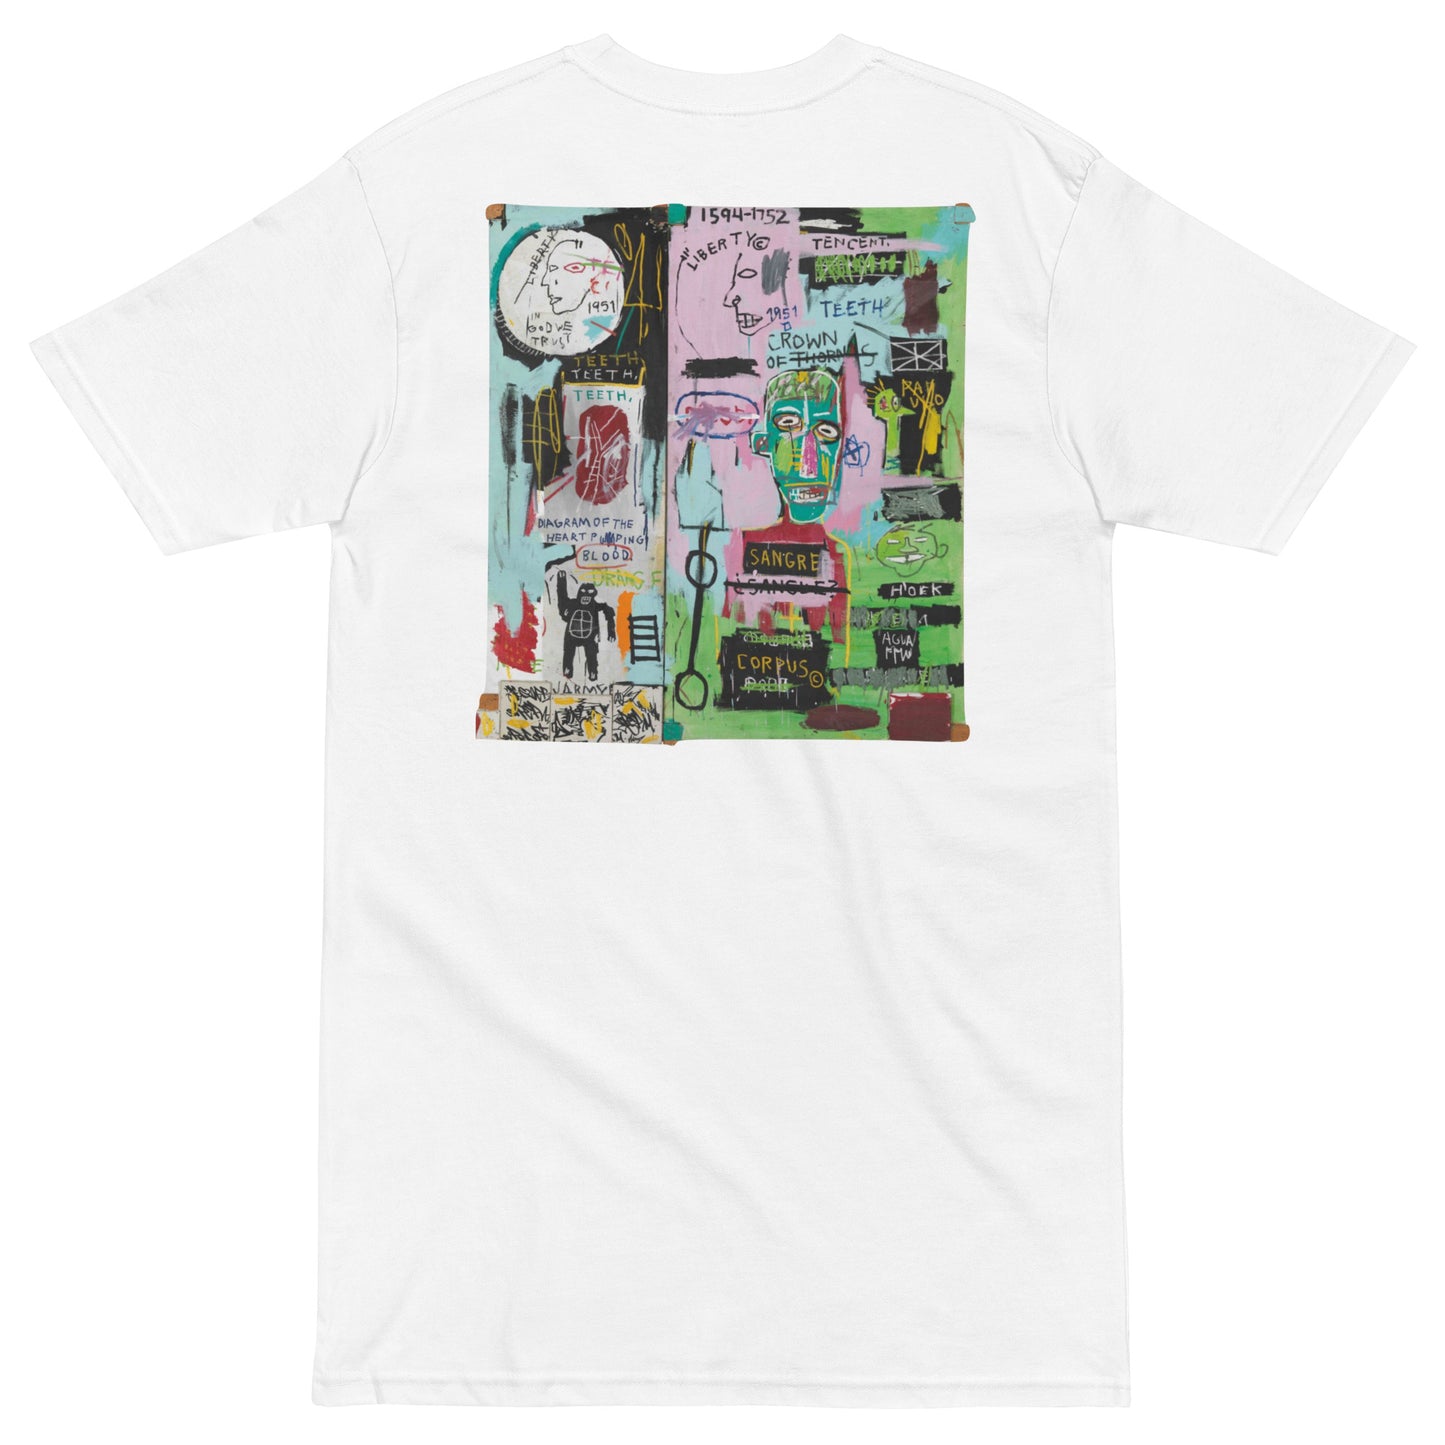 Jean-Michel Basquiat "In Italian" Artwork Embroidered and Printed Premium Streetwear T-Shirt White